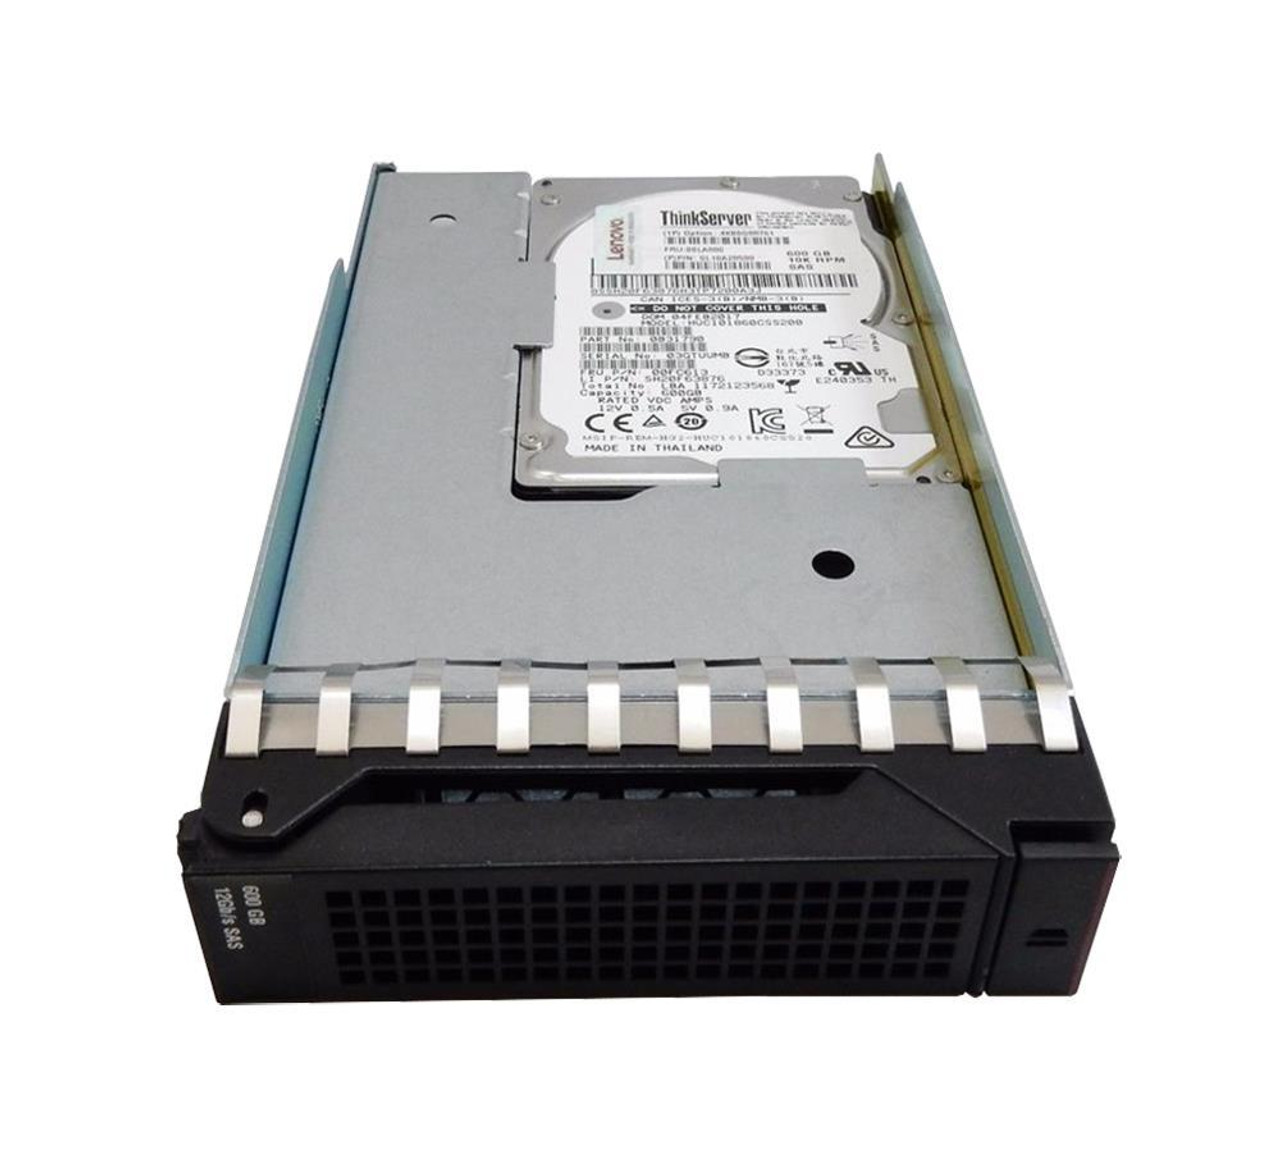 4XB0G88761-A1 Lenovo 600GB 10000RPM SAS 12Gbps Hot Swap 128MB Cache 2.5-inch Internal Hard Drive with 3.5-inch Tray for ThinkServer Gen5